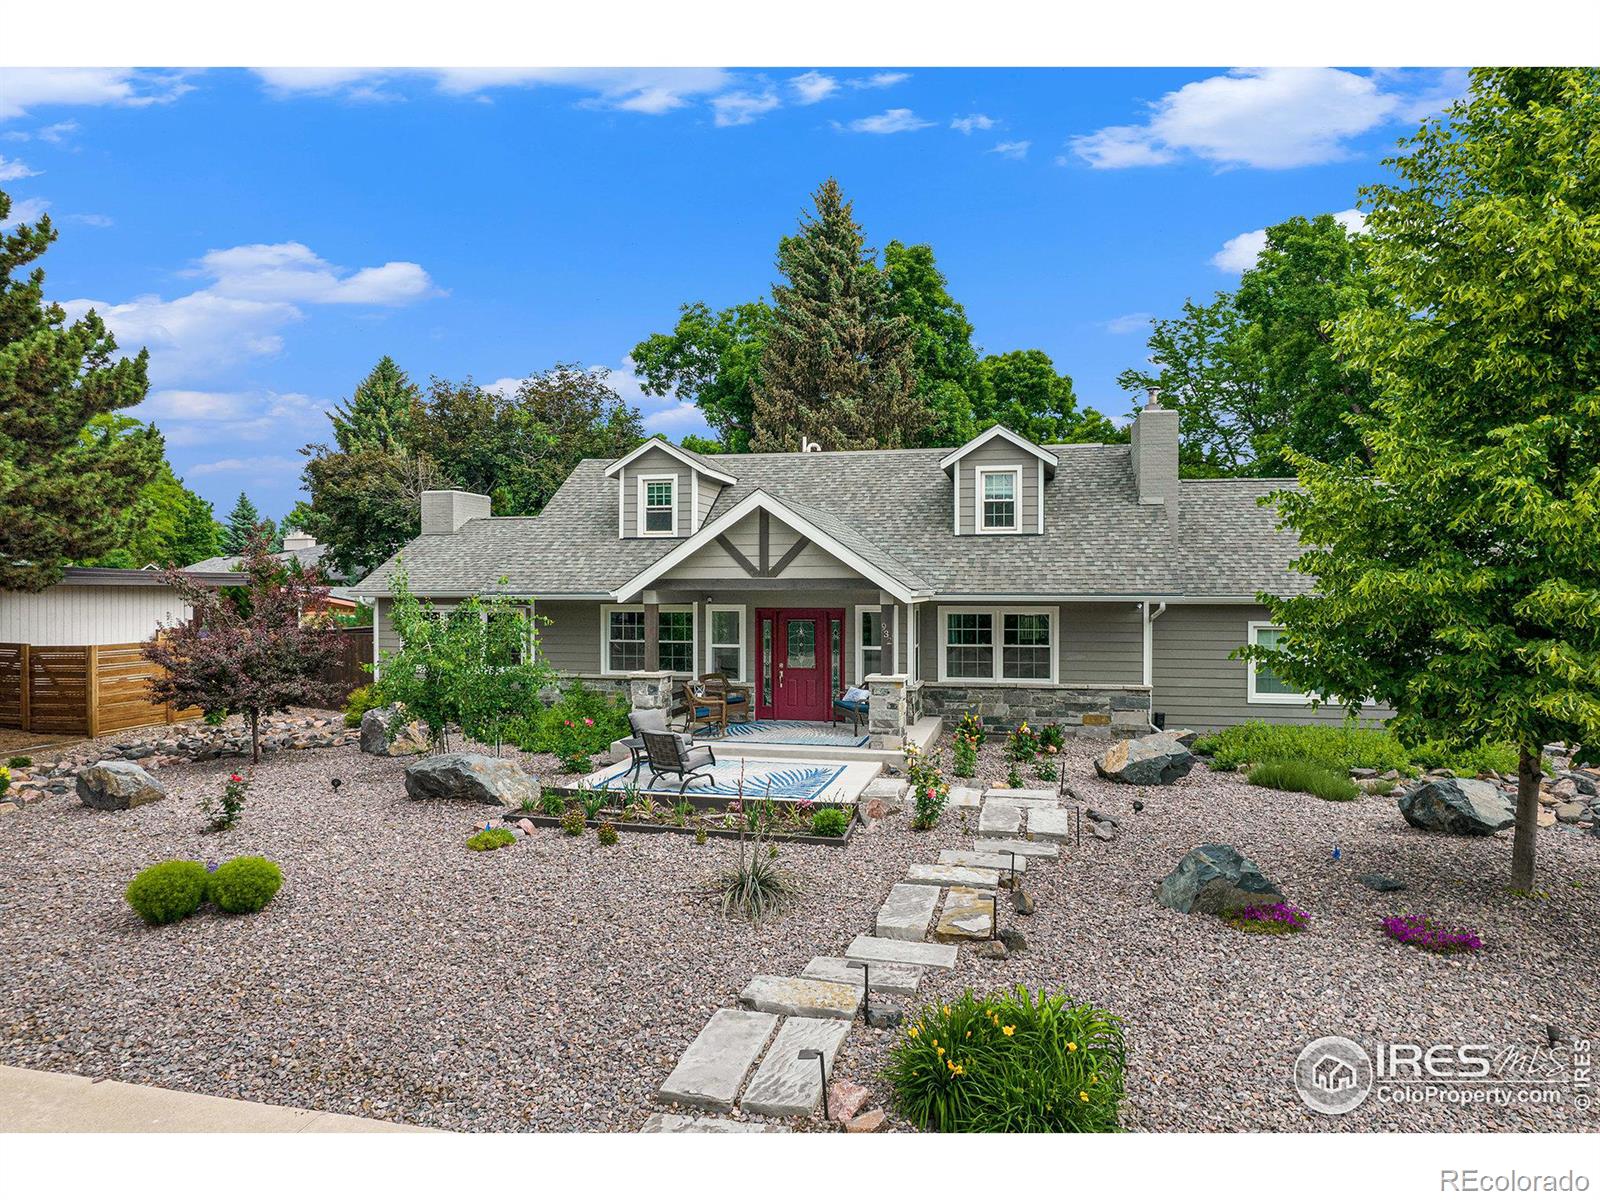 932 E Pitkin Street, fort collins MLS: 4567891012749 Beds: 5 Baths: 4 Price: $1,175,000